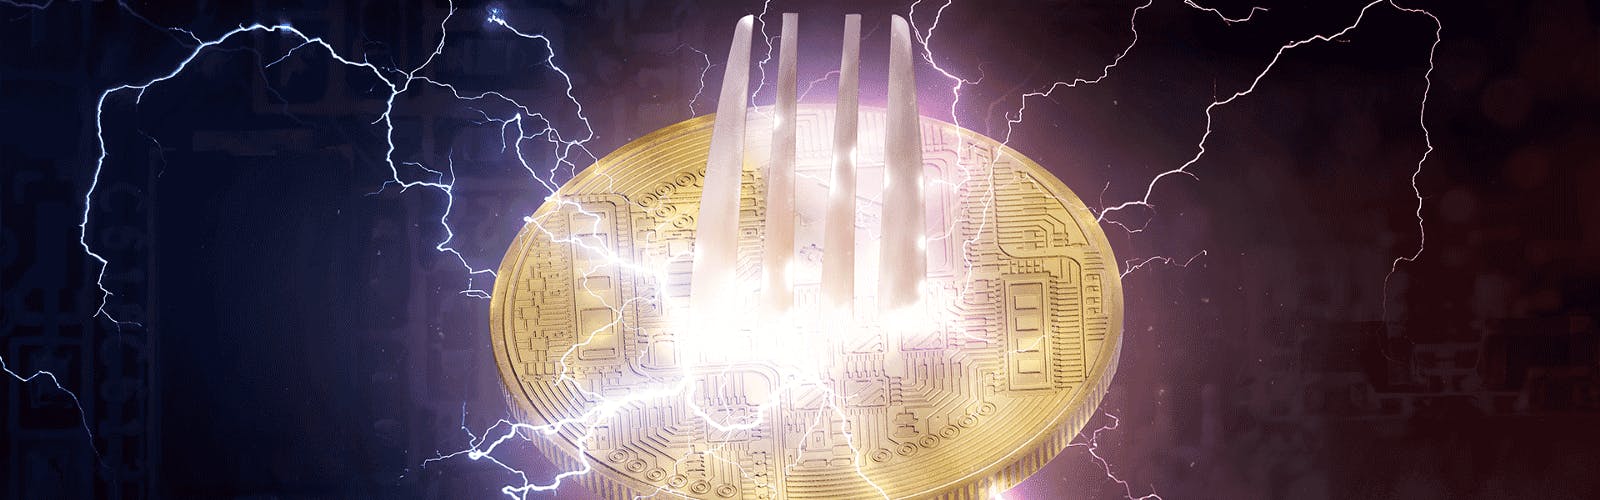 /fork-off-what-the-bitcoin-cash-hard-fork-means-for-crypto-fe07db1d038 feature image